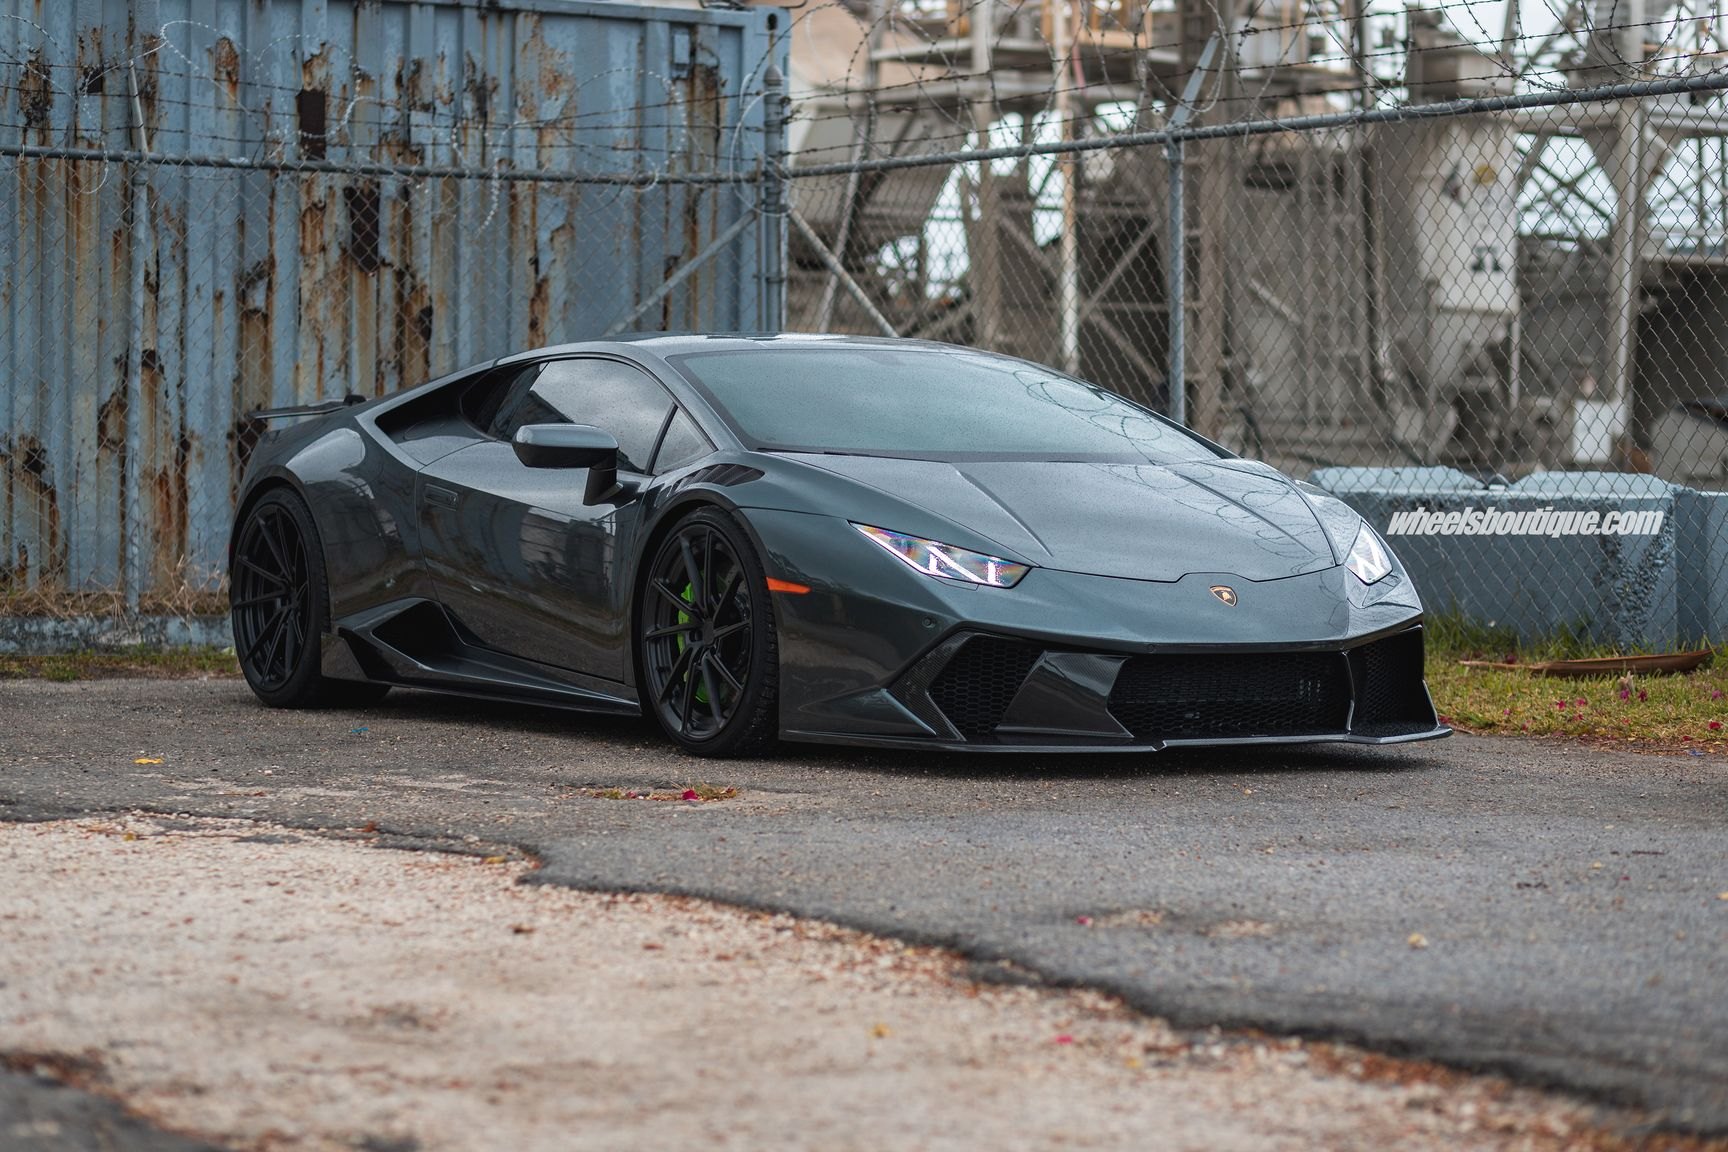 Gray Lamborghini Huracan with Aftermarket Headlights - Photo by Anrky Wheels